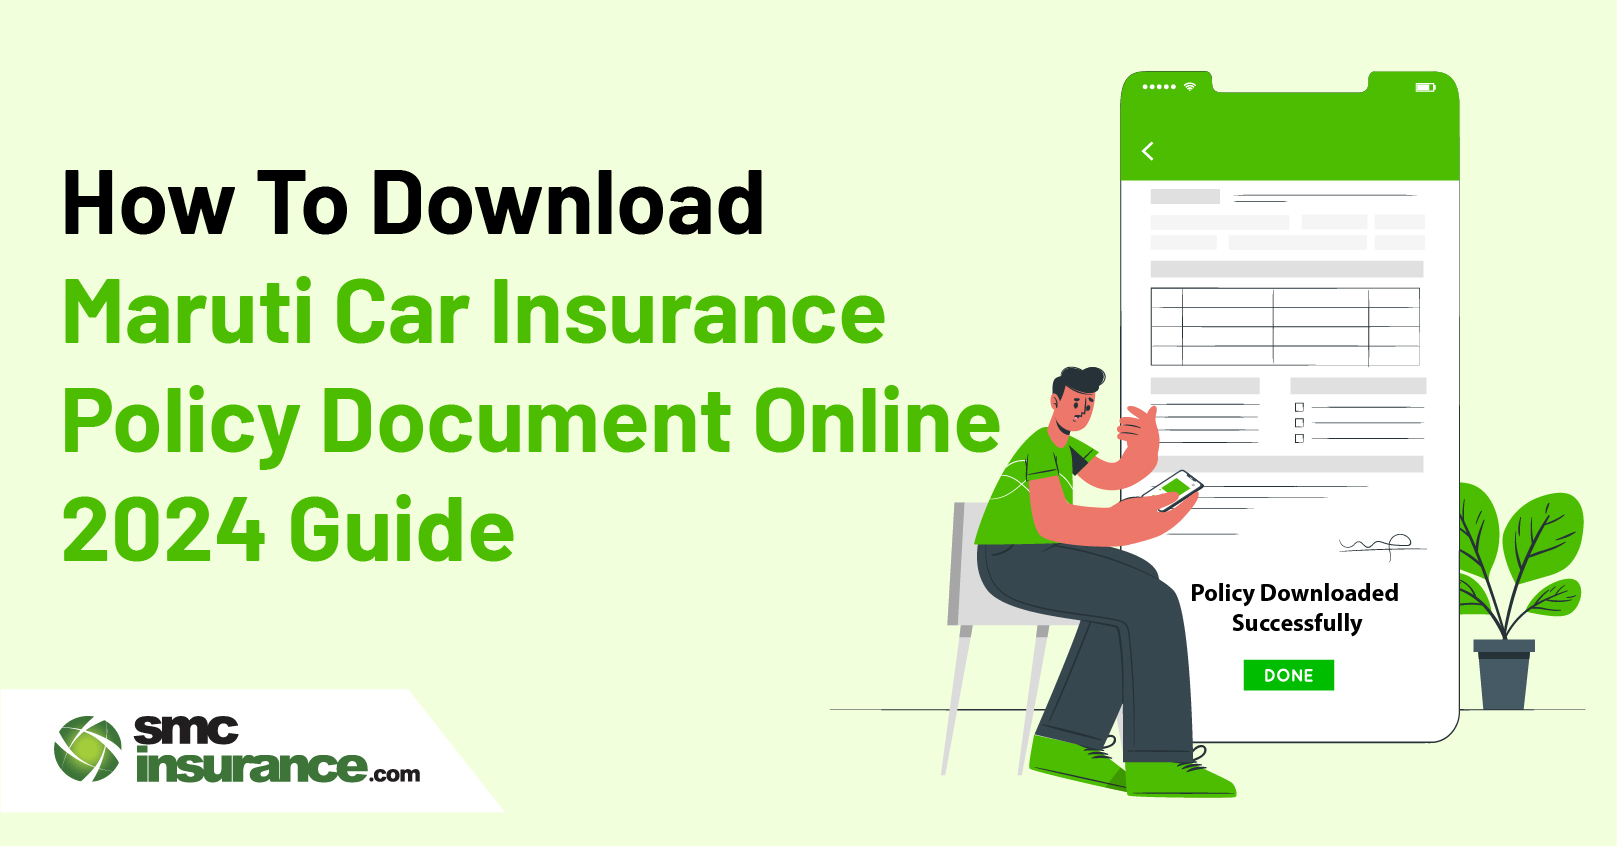 How To Download Maruti Car Insurance Policy Document Online: 2024 Guide